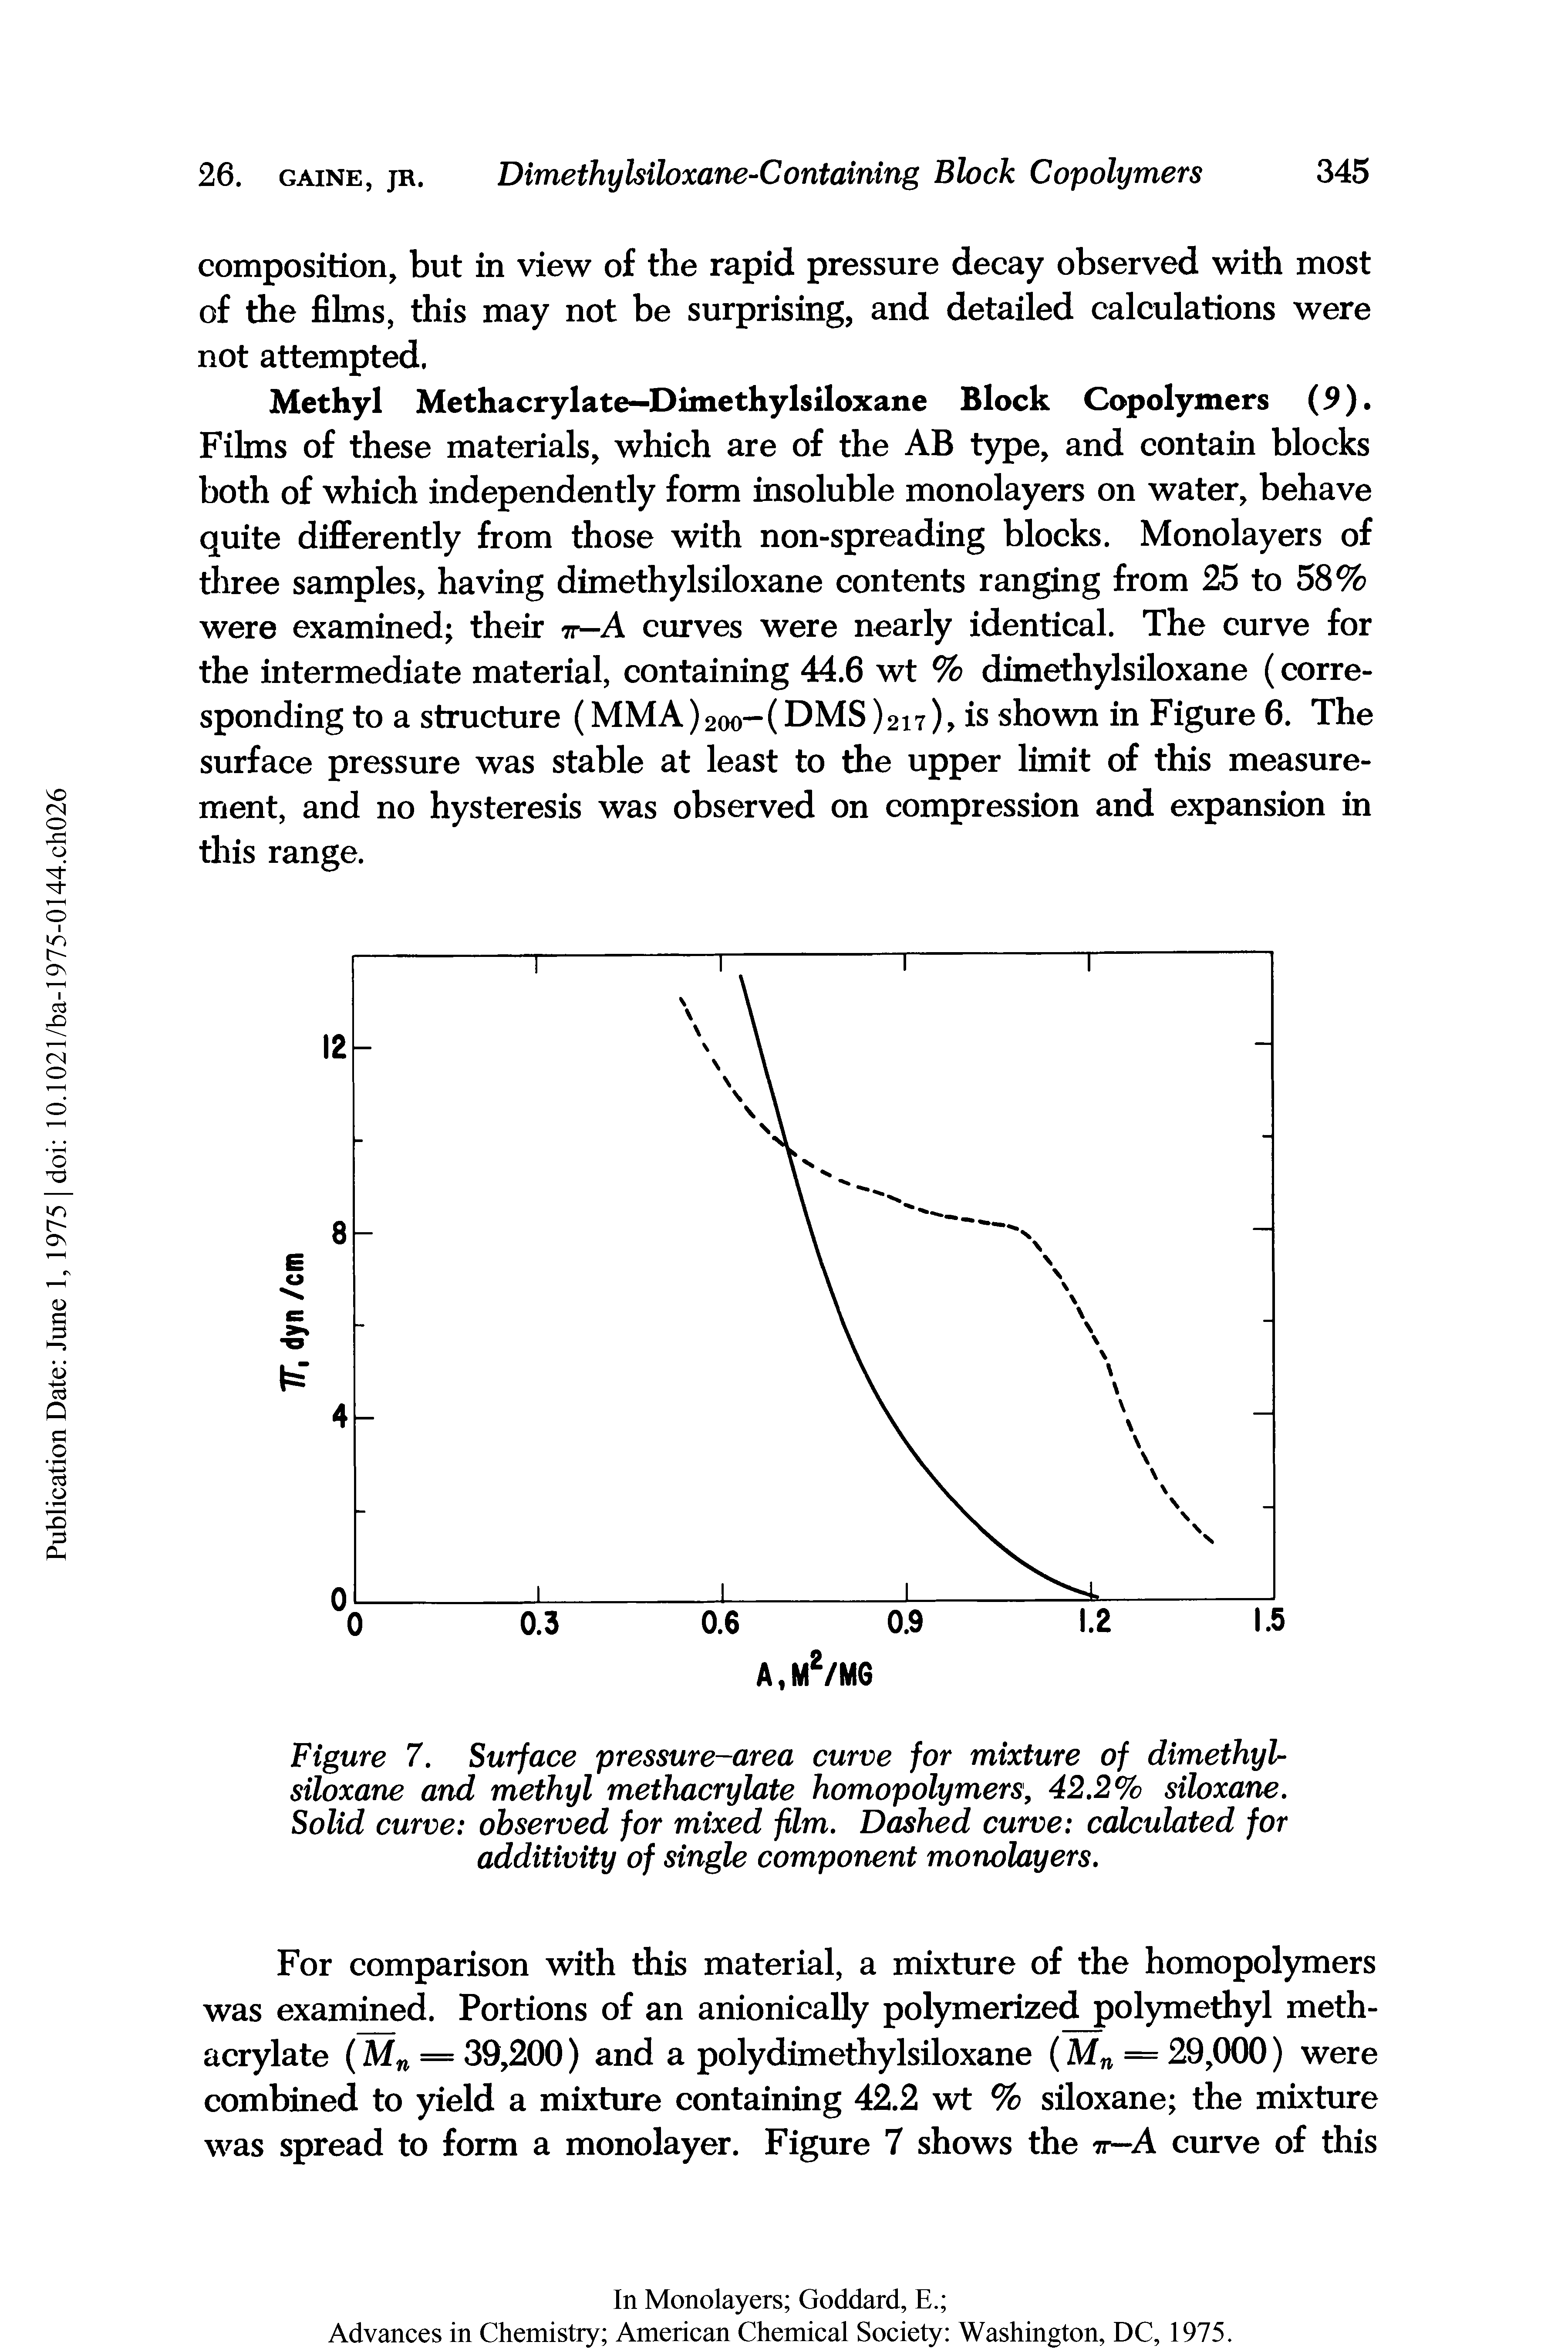 Figure 7. Surface pressure-area curve for mixture of dimethylsiloxane and methyl methacrylate homopolymers, 42.2% siloxane. Solid curve observed for mixed film. Dashed curve calculated for additivity of single component monolayers.